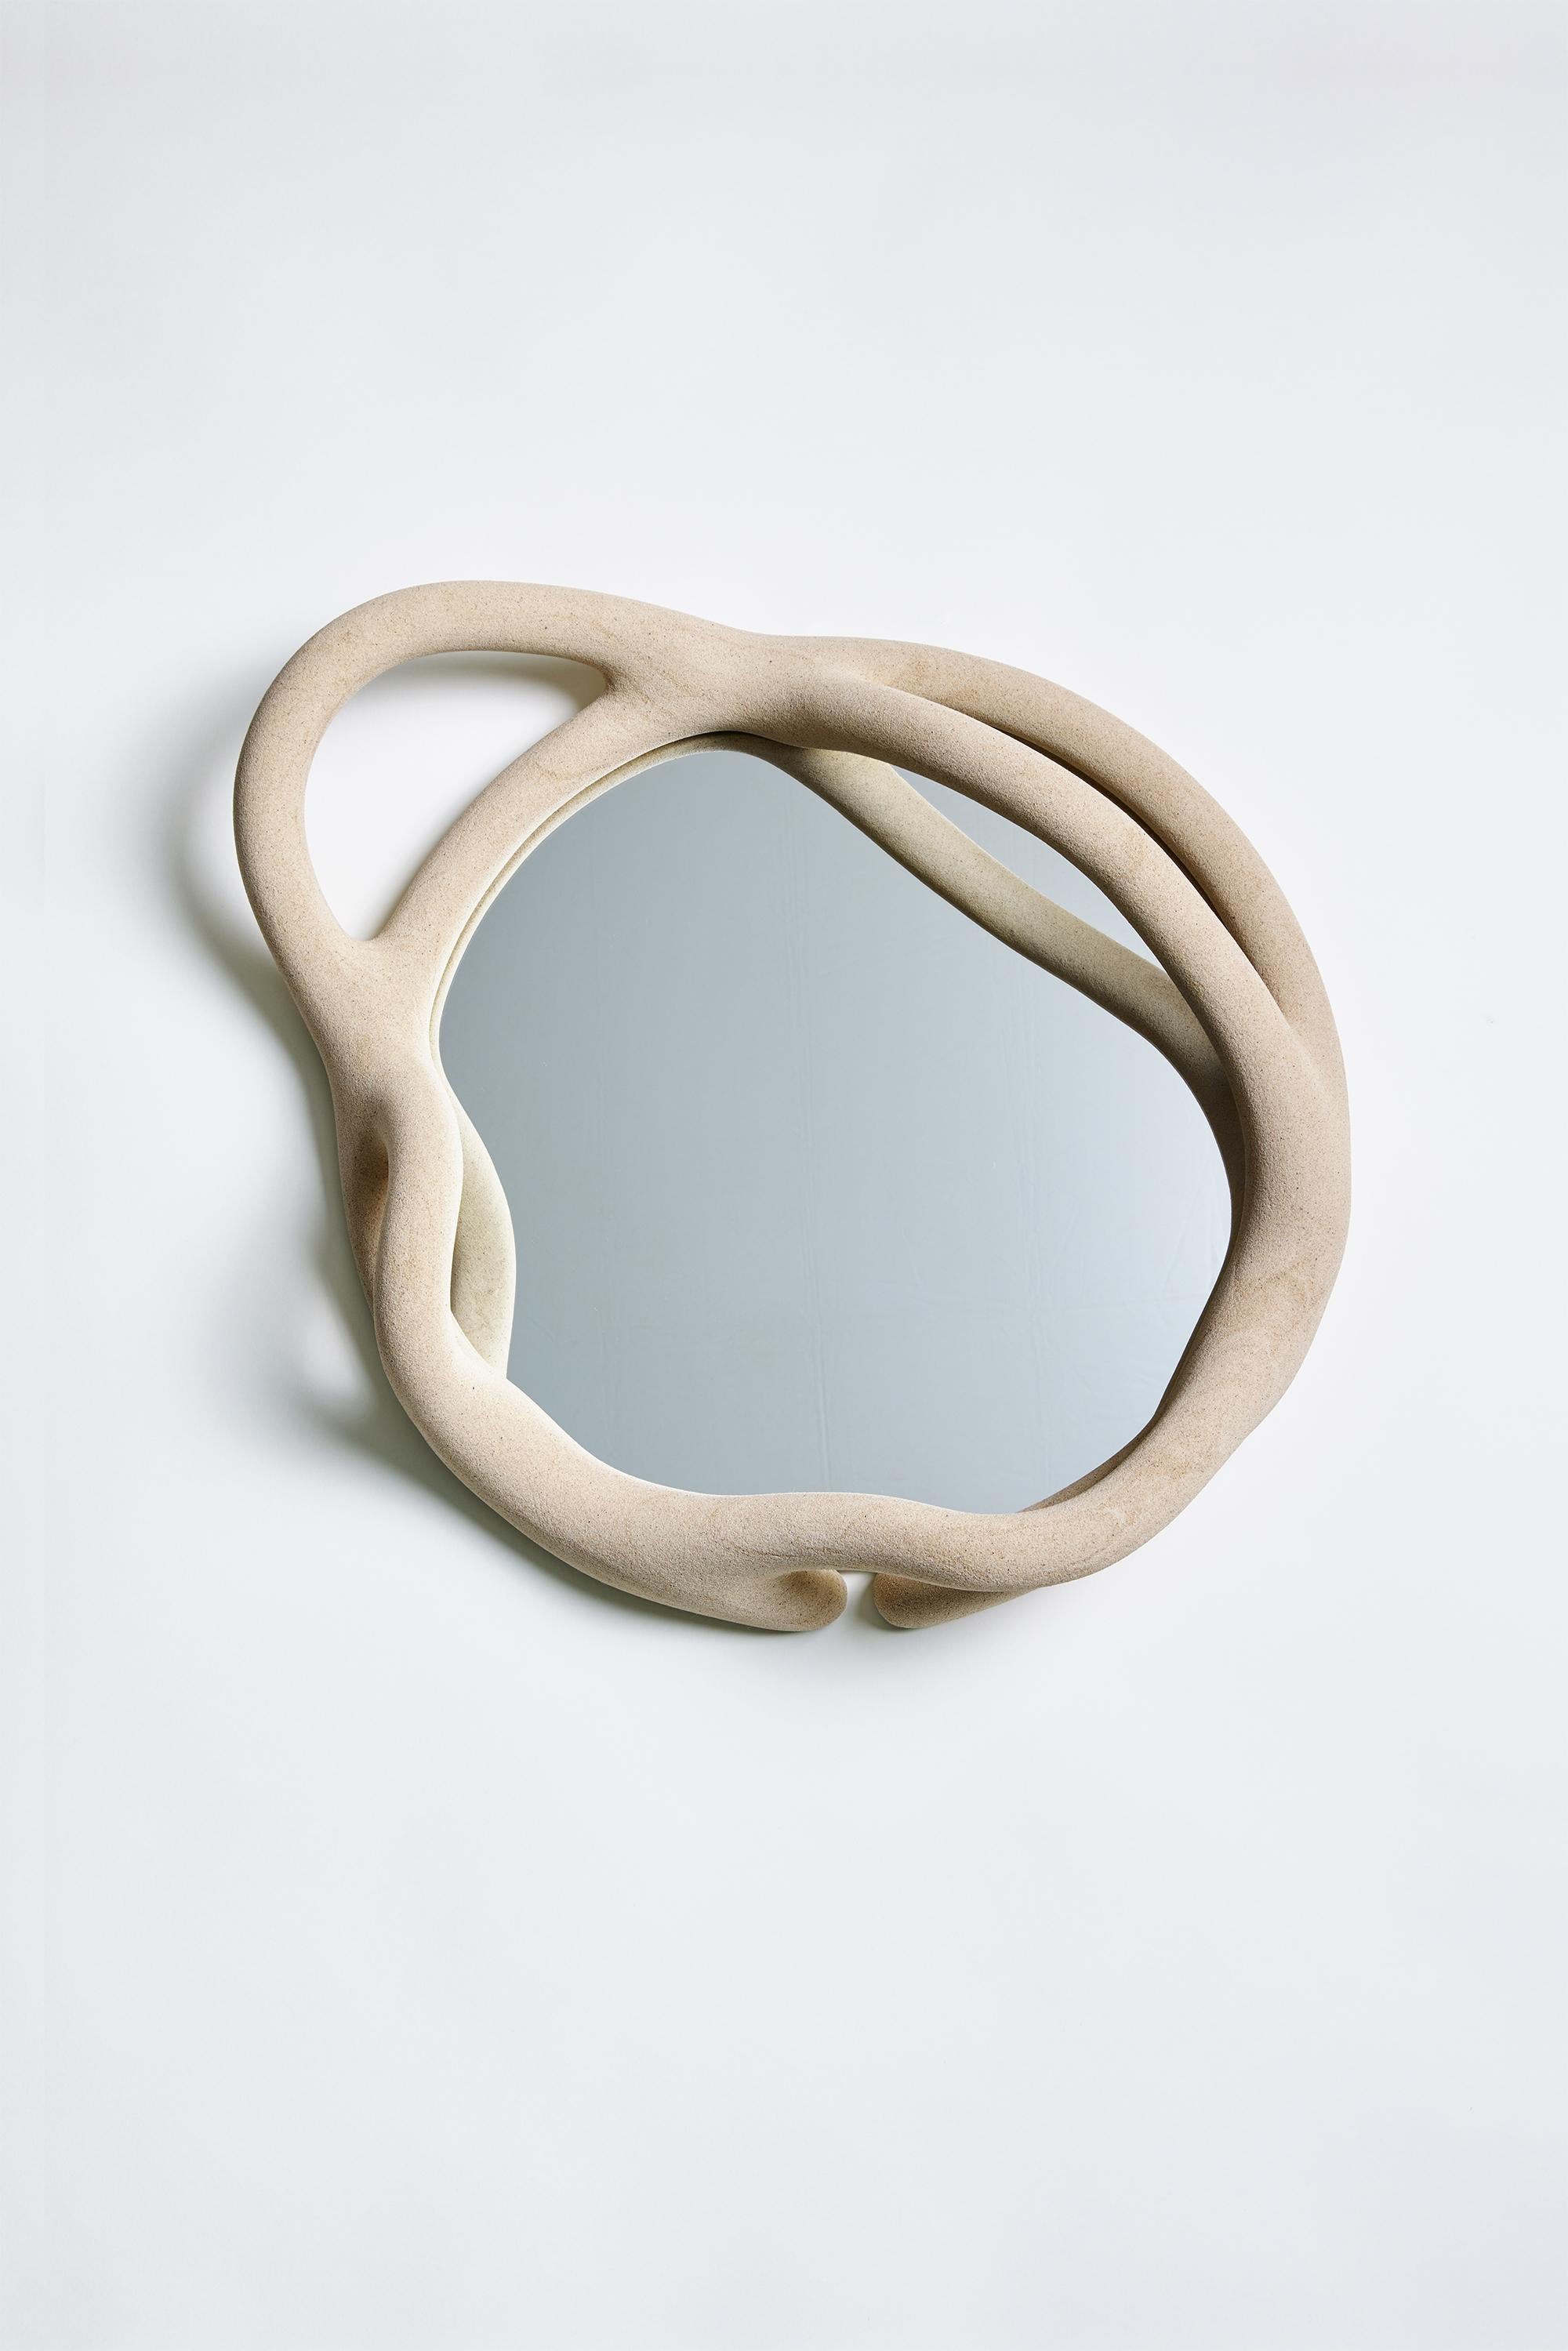 Medium Beige Portal Mirror by Hot Wire Extensions
Materials: Waste nylon powder, locally sourced beige sand, copper pipe, mirror.
Dimensions: D 12.5 x W 61 x H 60 cm 
9 kg
Different dimensions, shapes, and colors upon request.

Hot Wire Extensions